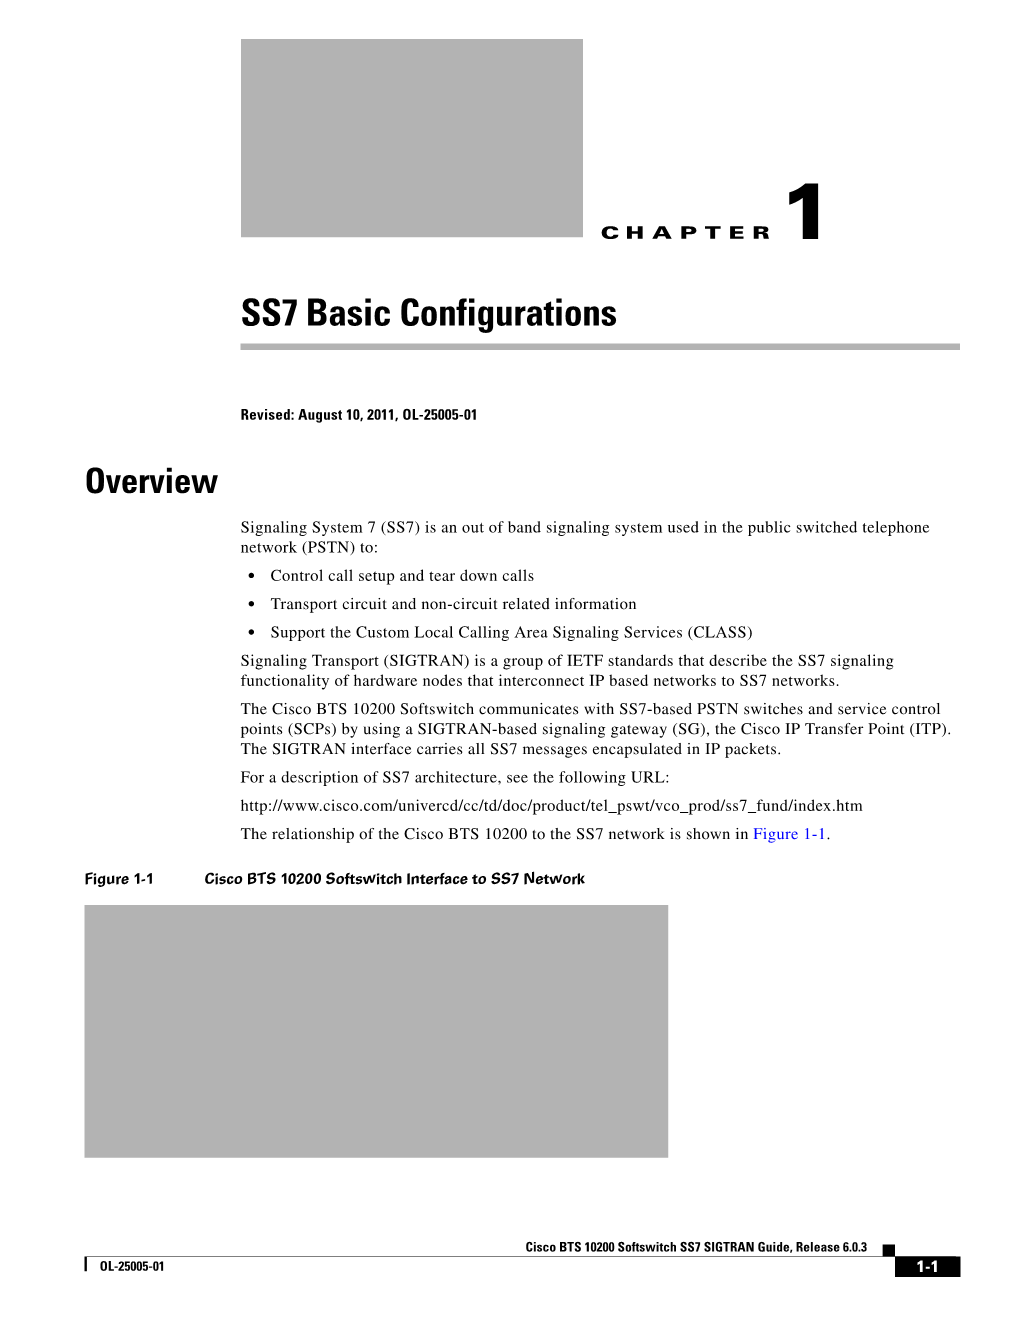 Chapter 1, “SS7 Basic Configurations.”1